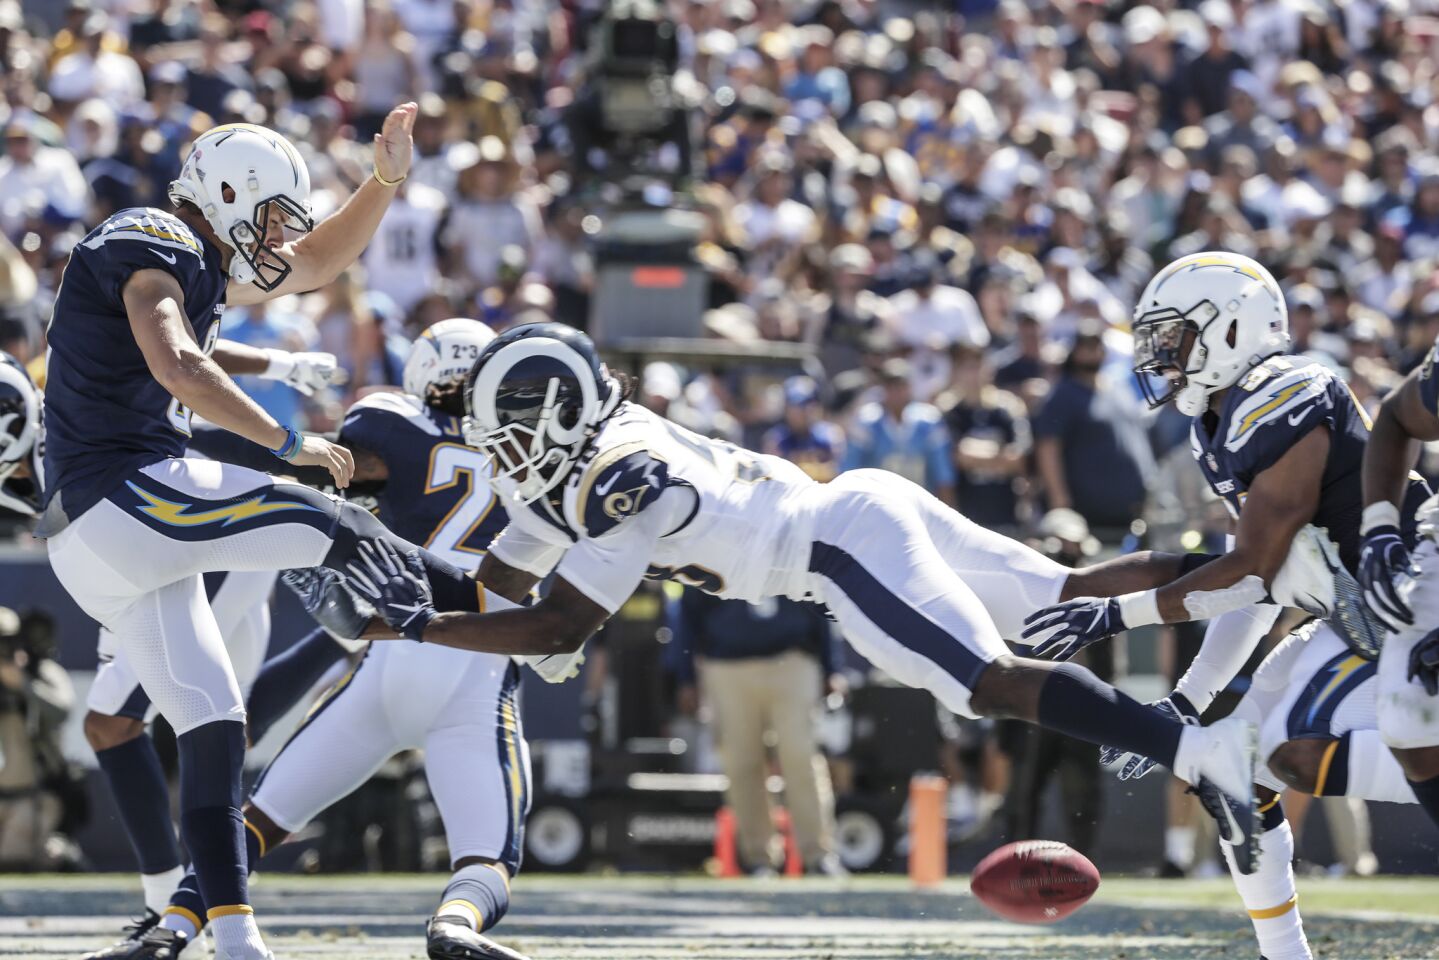 Rams linebacker Cory Littleton blocks the punt attempt of Chargers punter Drew Kaser, resulting in a second quarter Rams touchdown at the Coliseum.